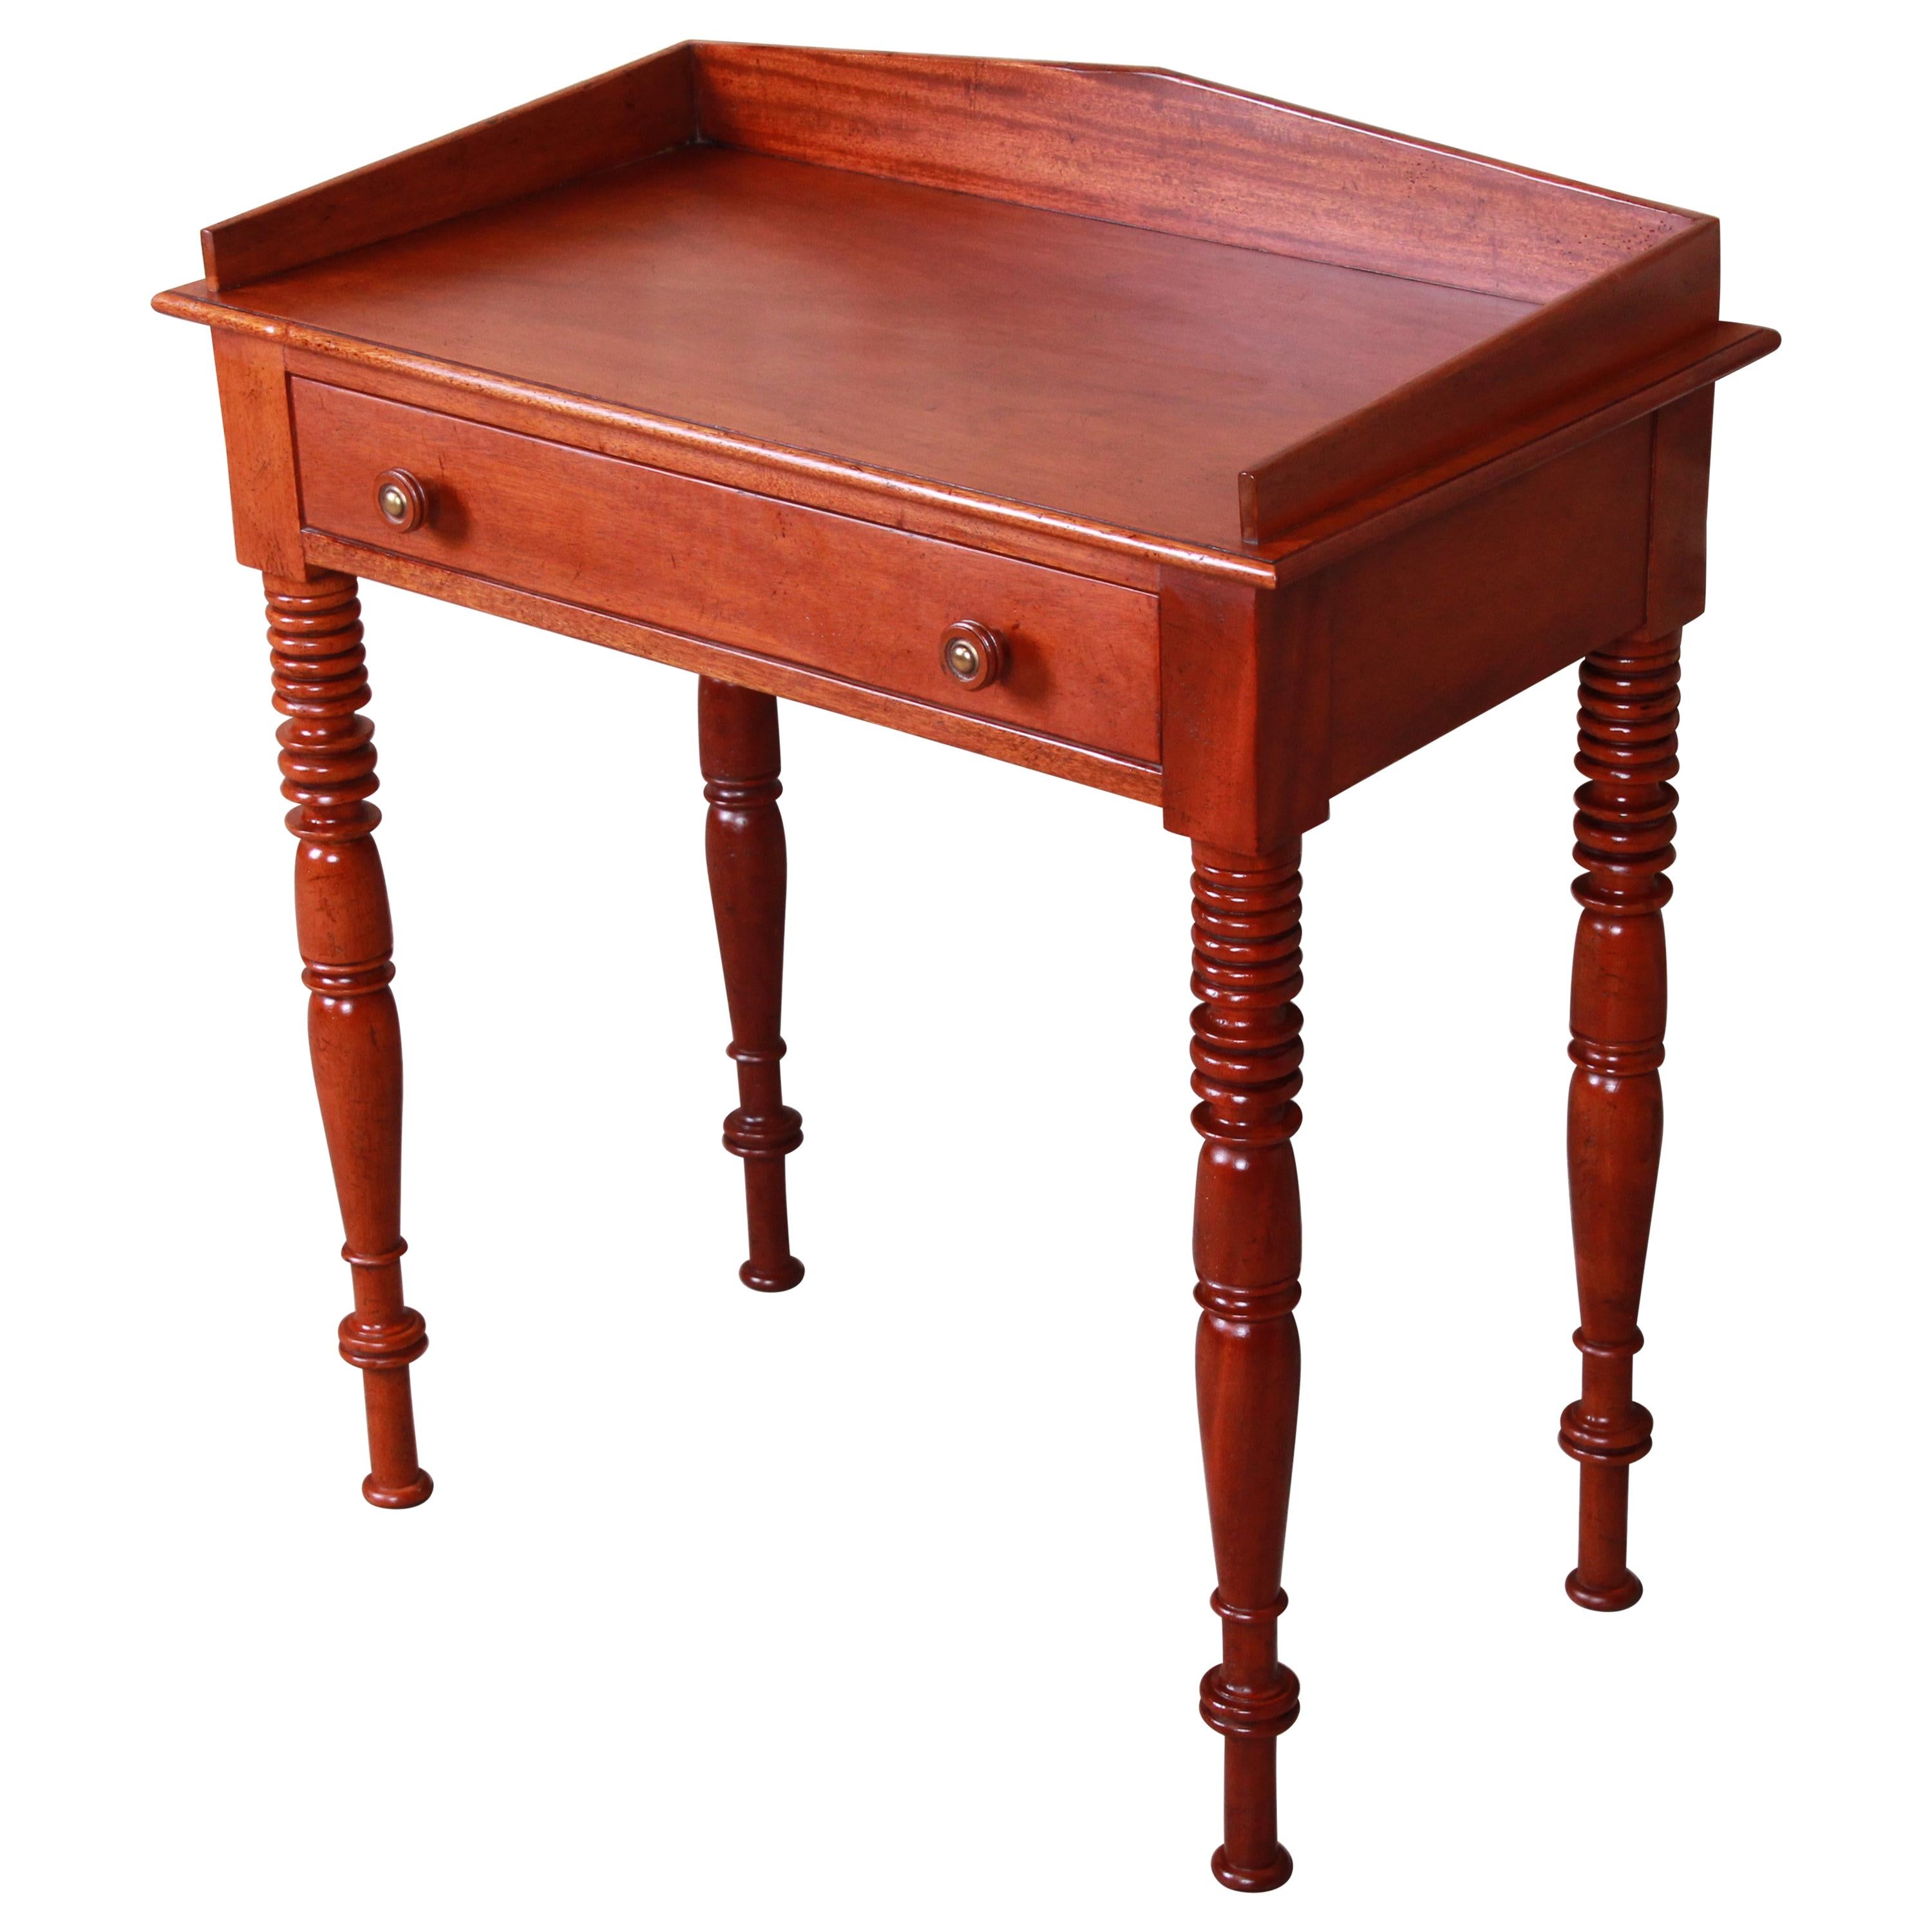 Baker Furniture Milling Road Carved Mahogany Small Writing Desk or Entry Table